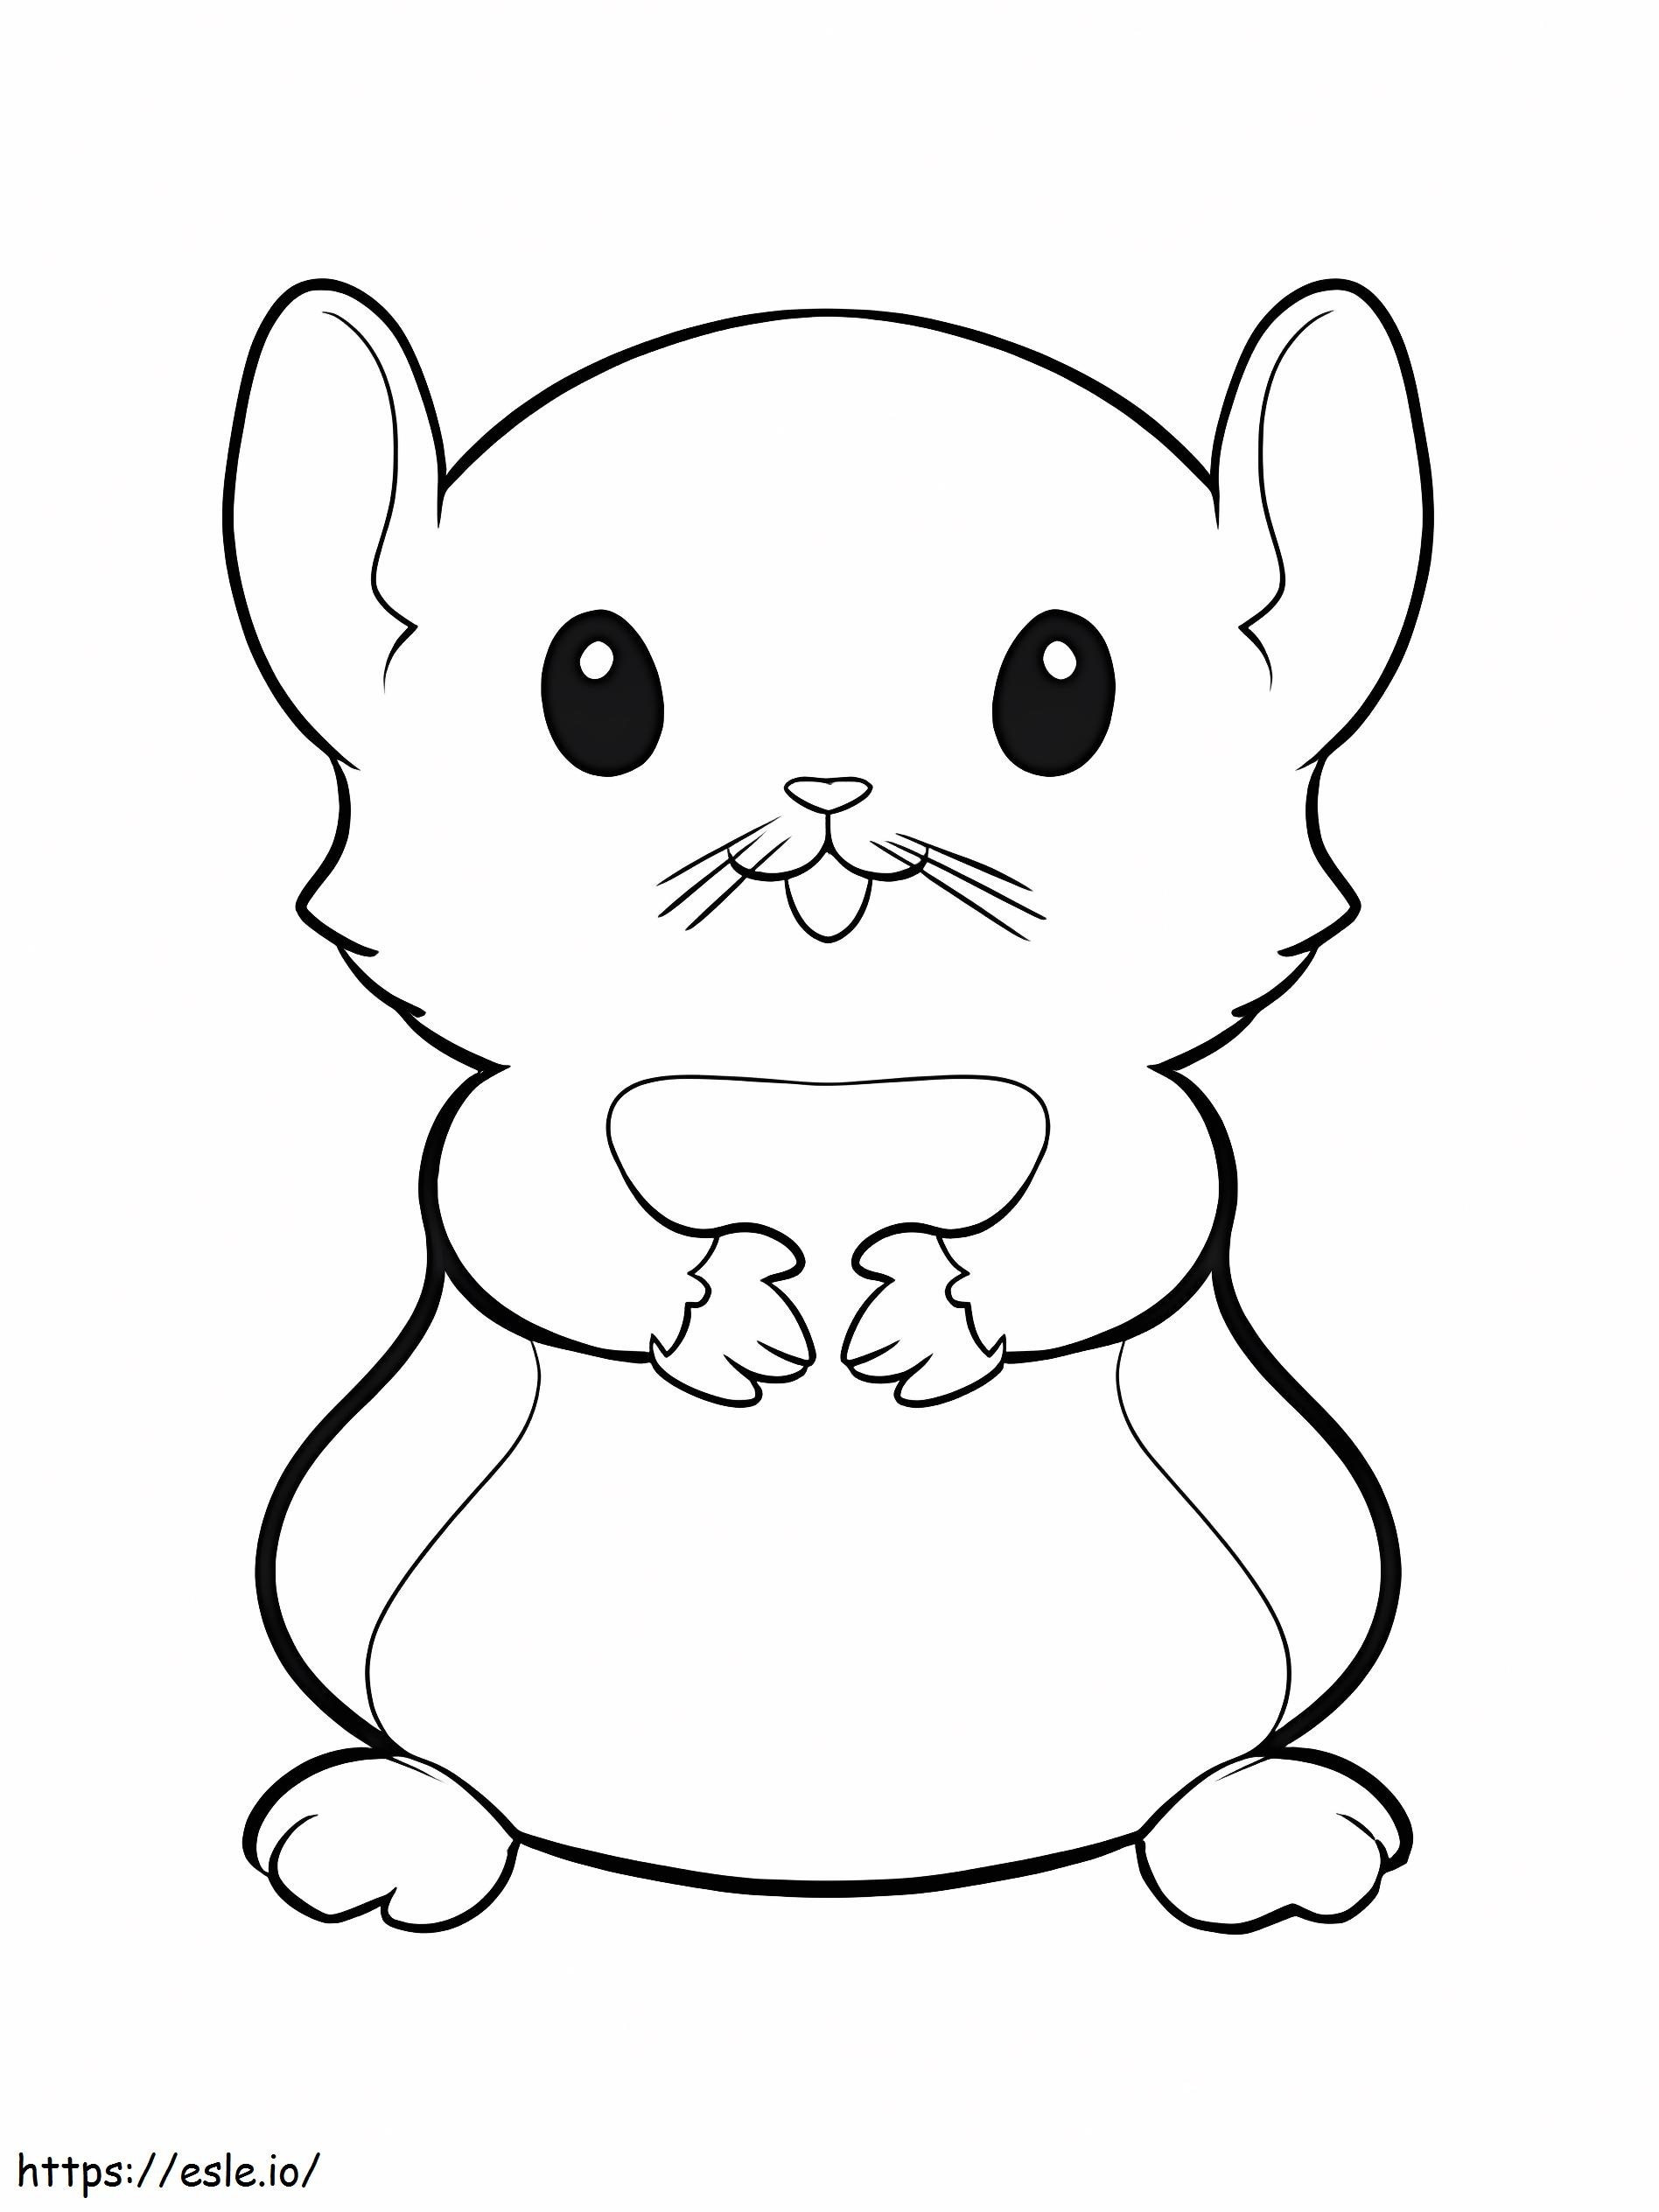 Sitting Hamster coloring page